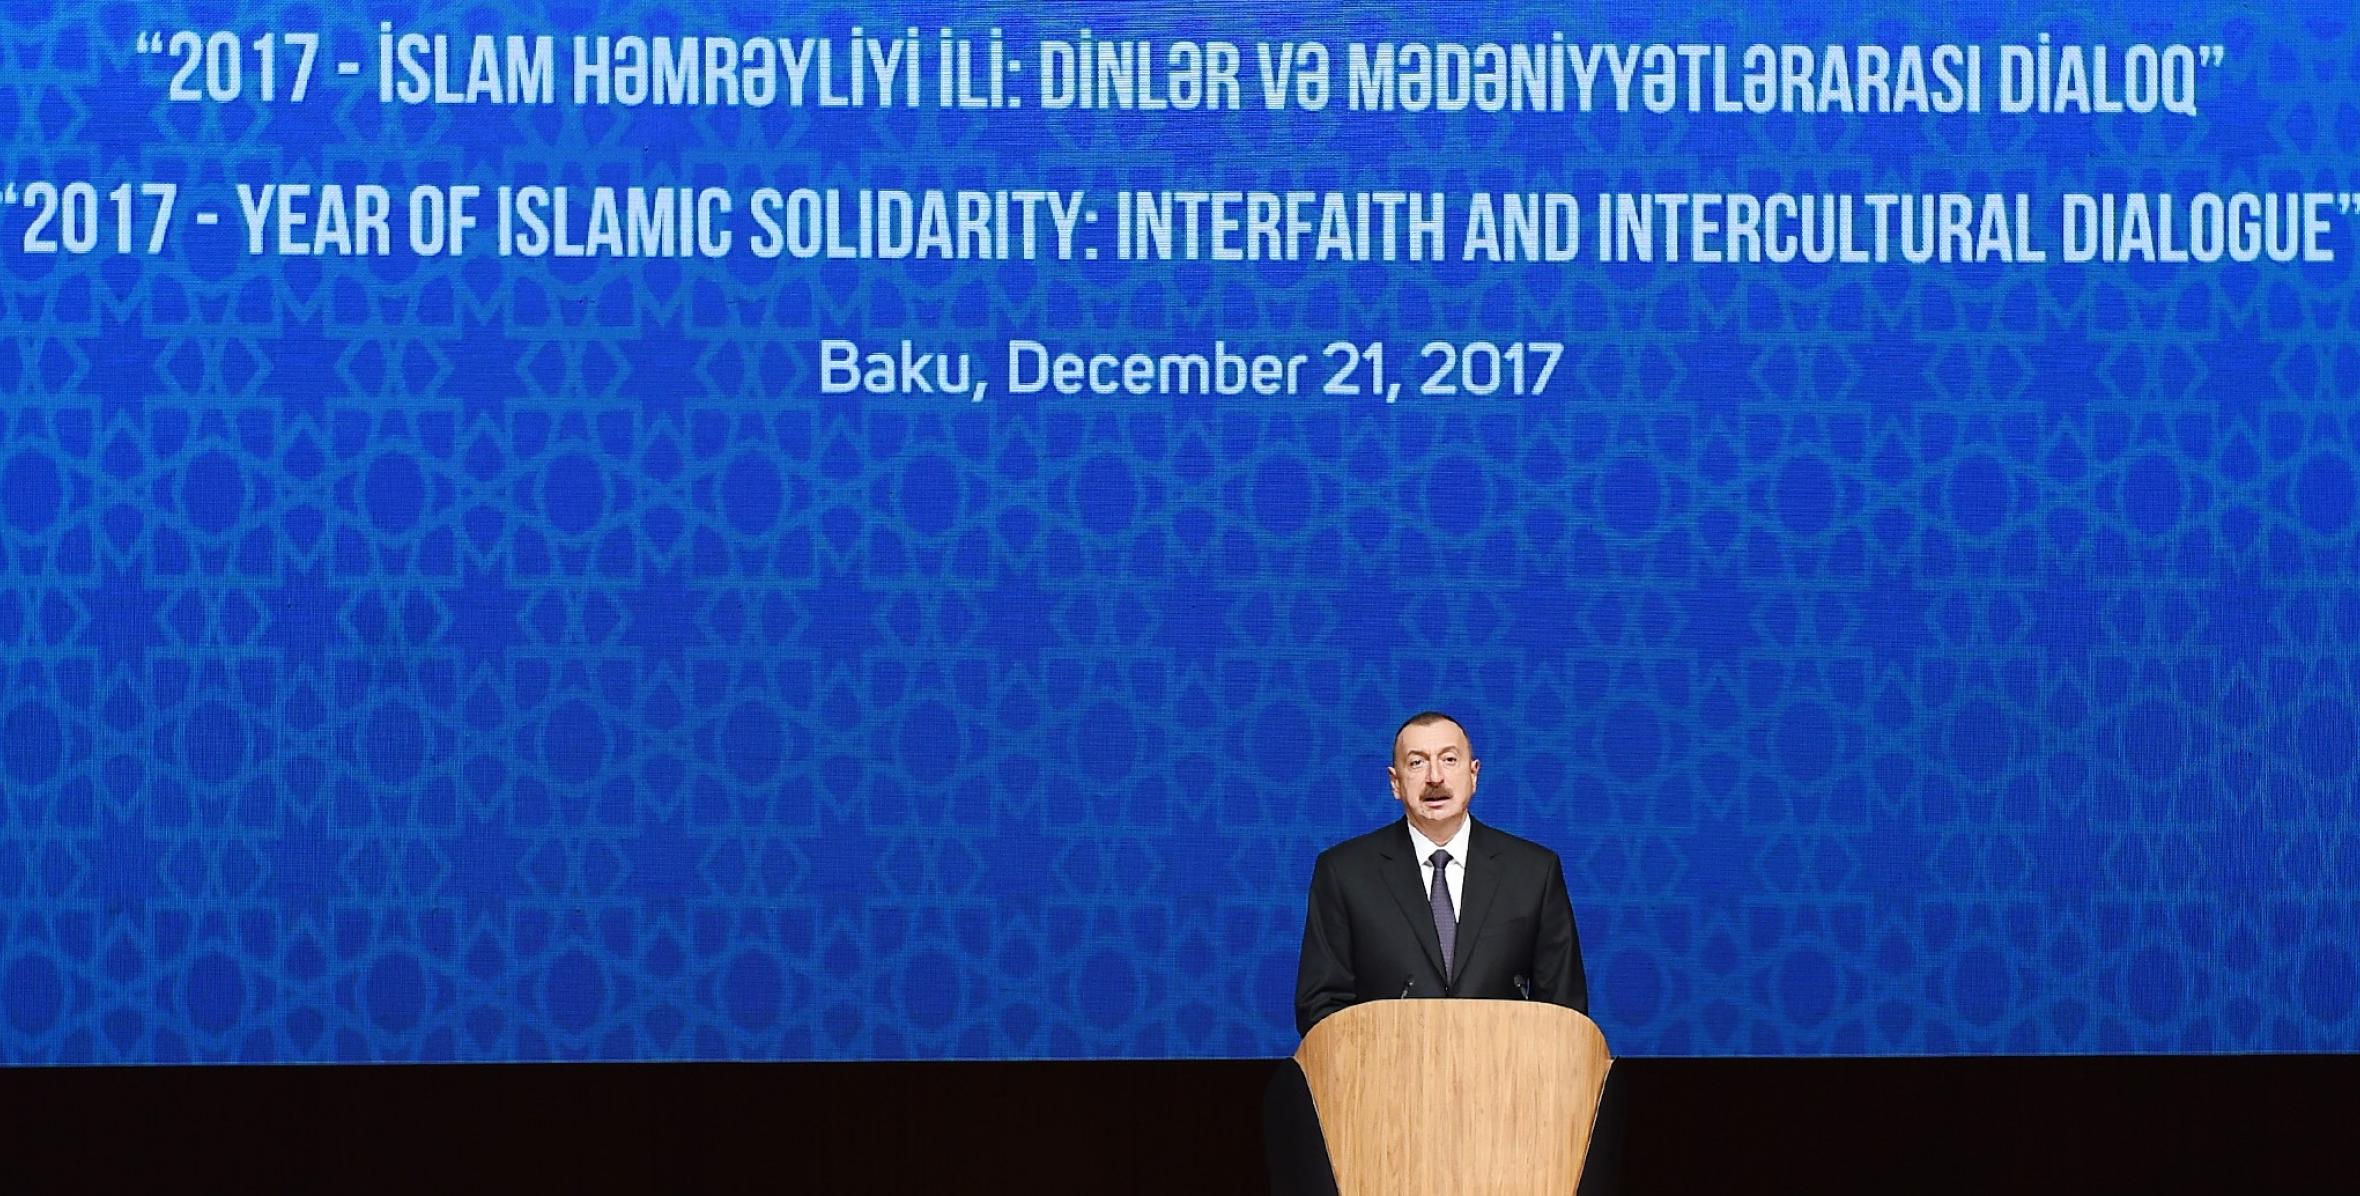 Speech by Ilham Aliyev at  the opening ceremony of the conference on “2017- Year of Islamic Solidarity: Interfaith and Intercultural Dialogue"